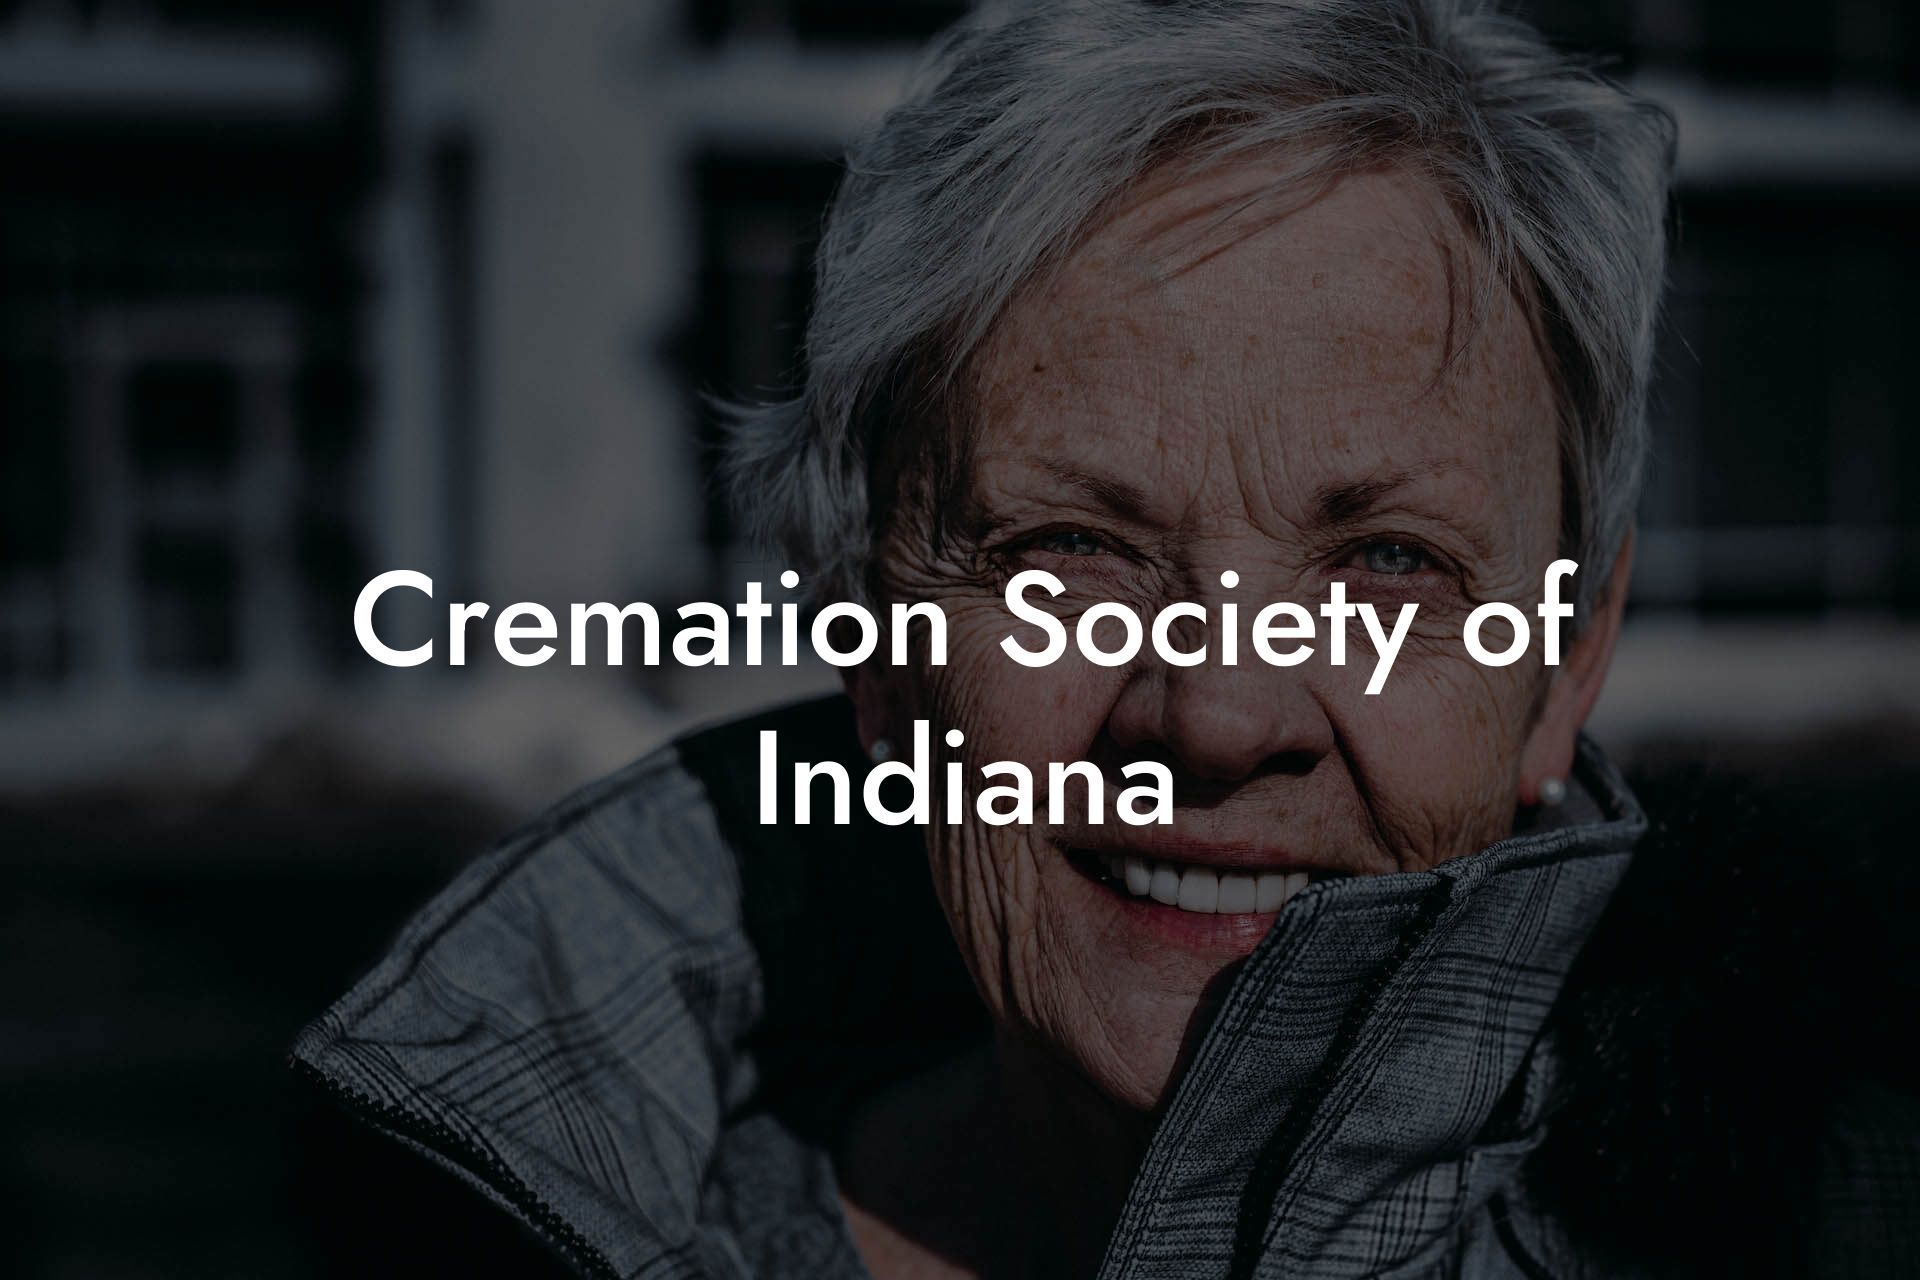 Cremation Society of Indiana